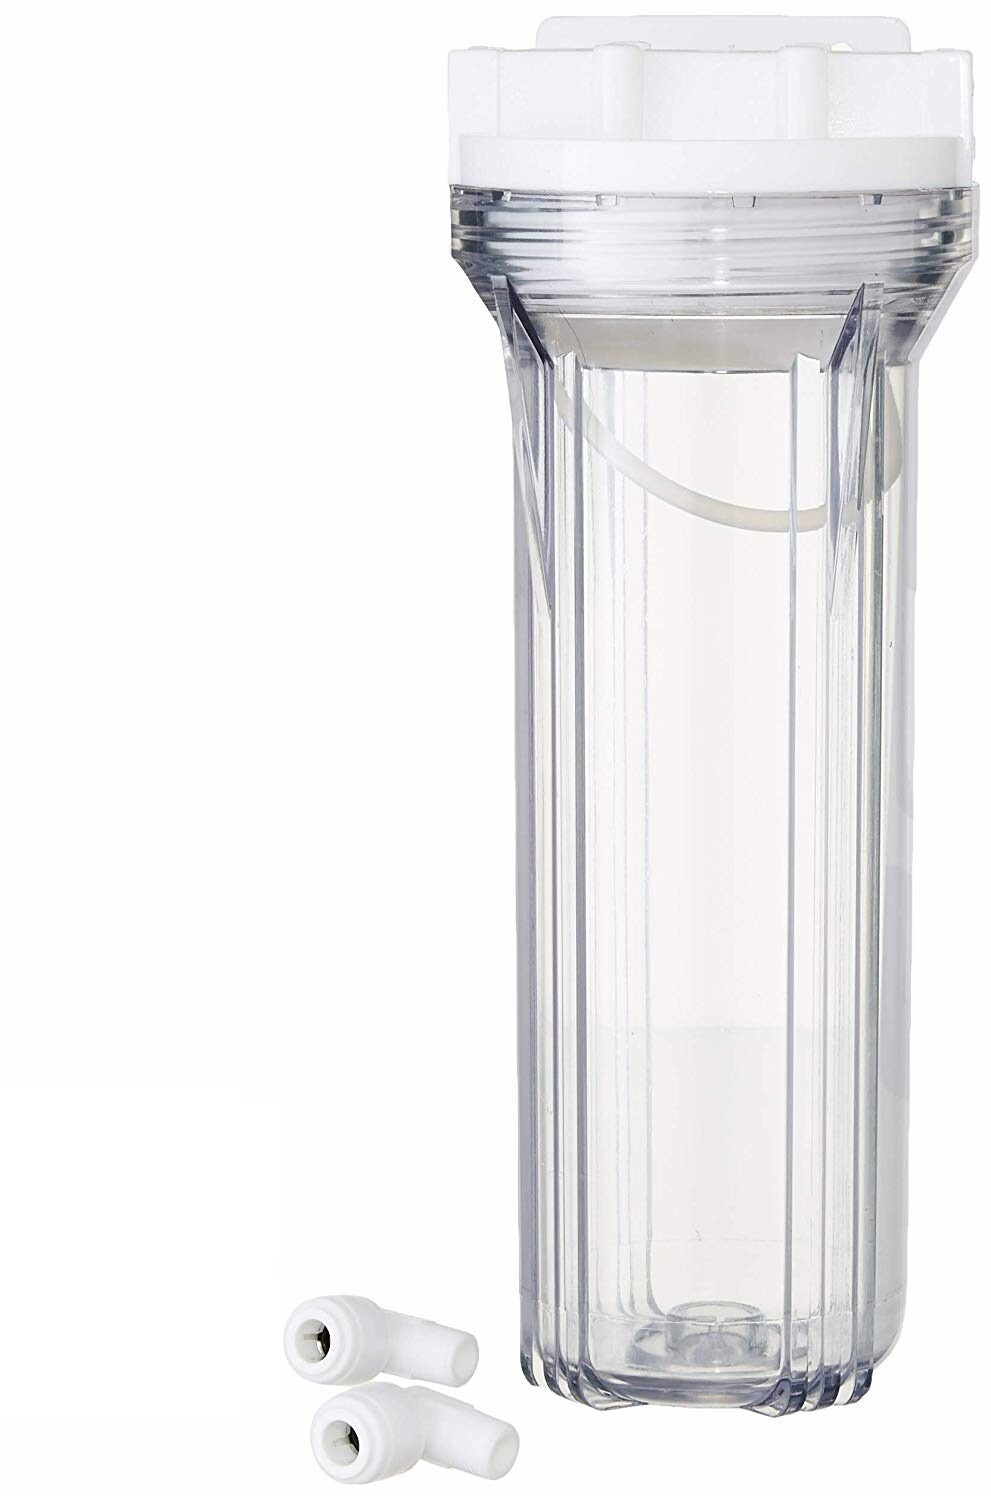 10 Inch Transparent Pre Filter Housing with 1/4" Elbow Connector for  Domestic Water Purifer